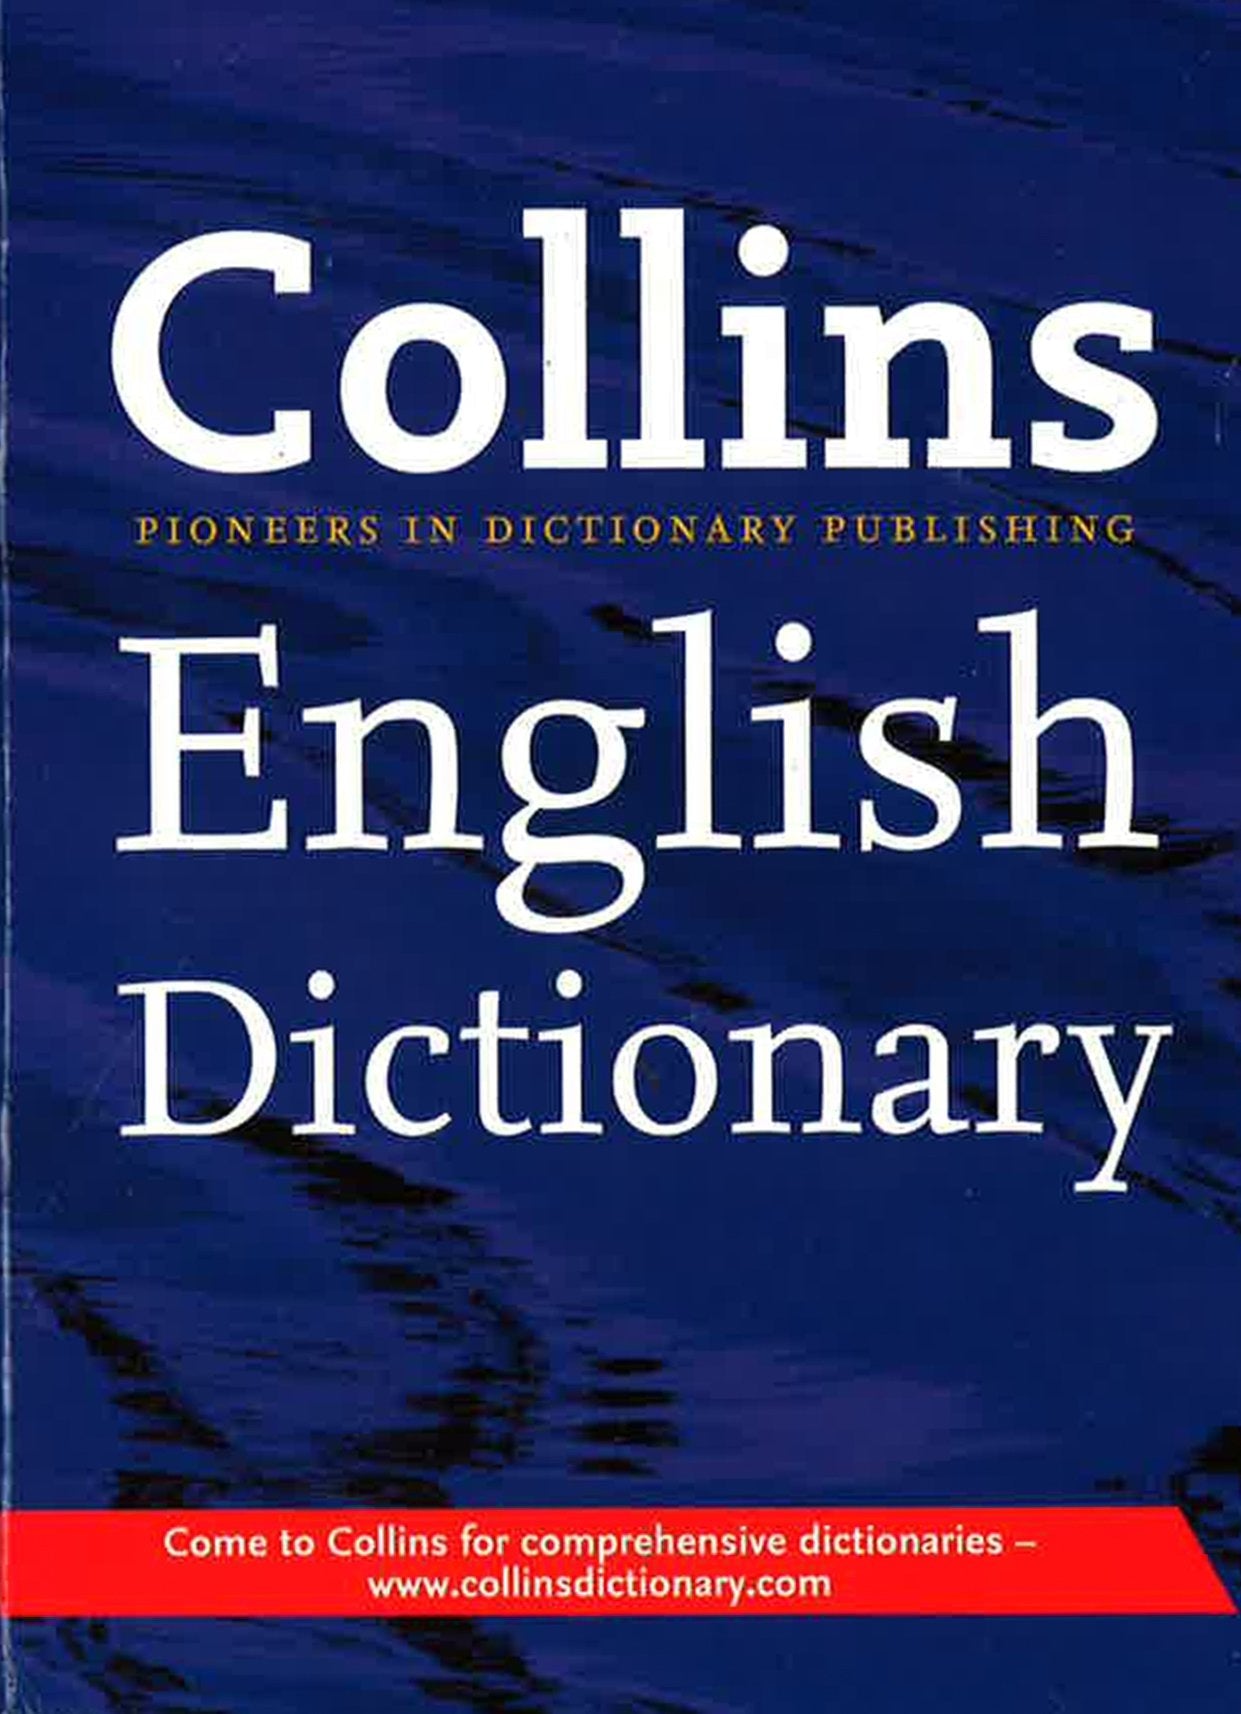 Collins English Dictionary - Defining lifes moments